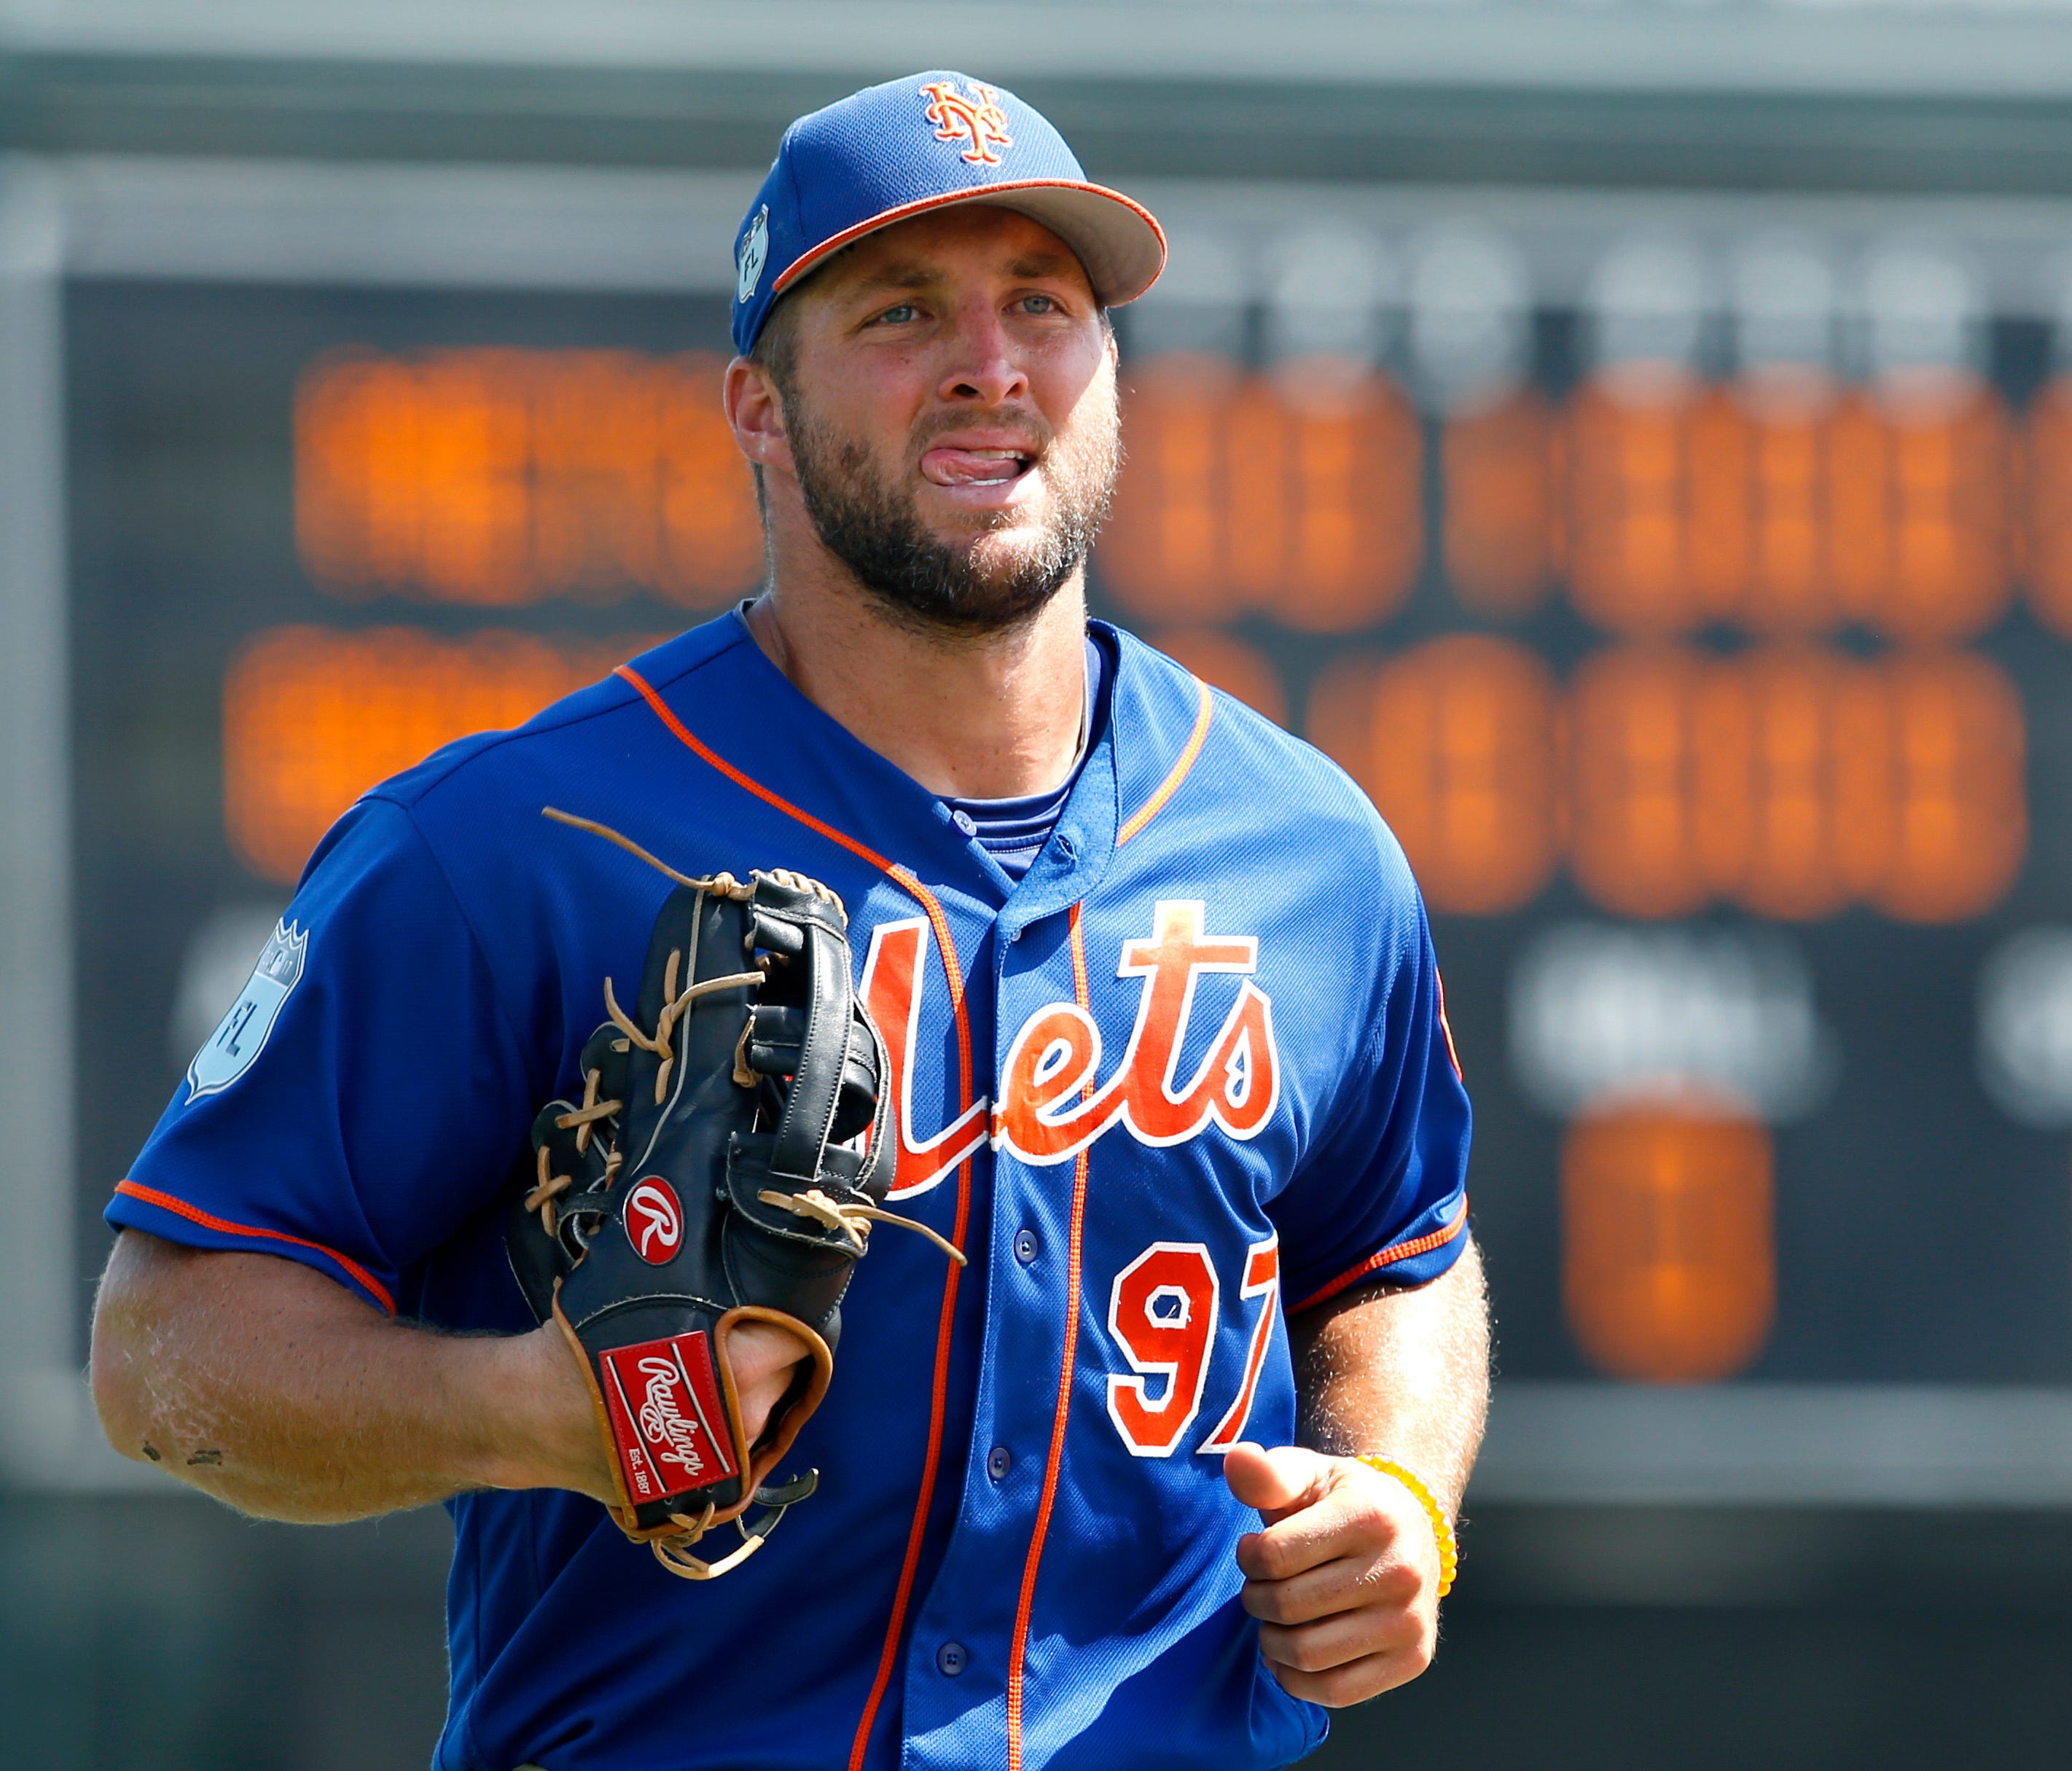 Tim Tebow batted .148 (4 for 27) in Grapefruit League play this spring.